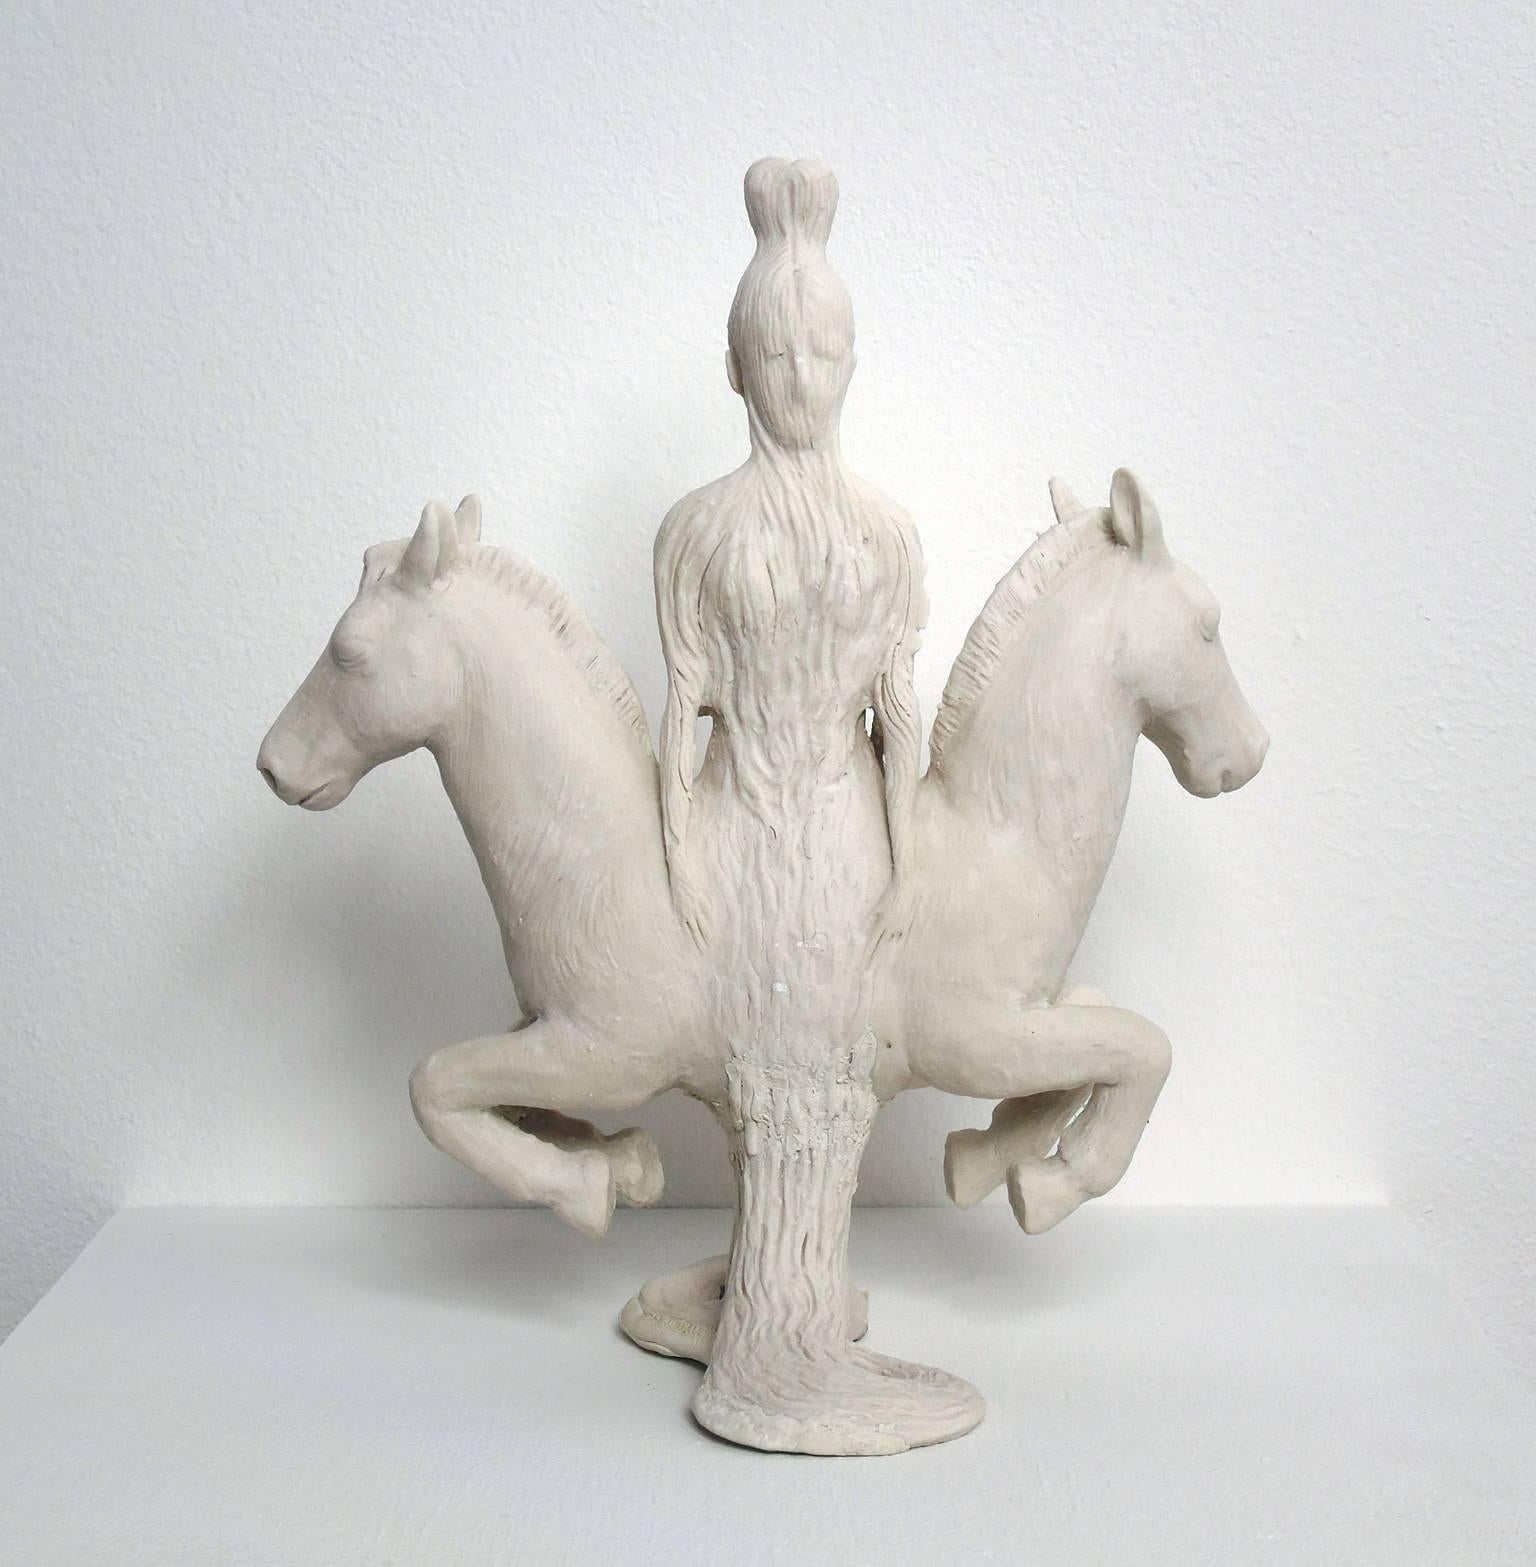 Goddess (white porcelain two sided figure) - Gray Figurative Sculpture by Robin Whiteman